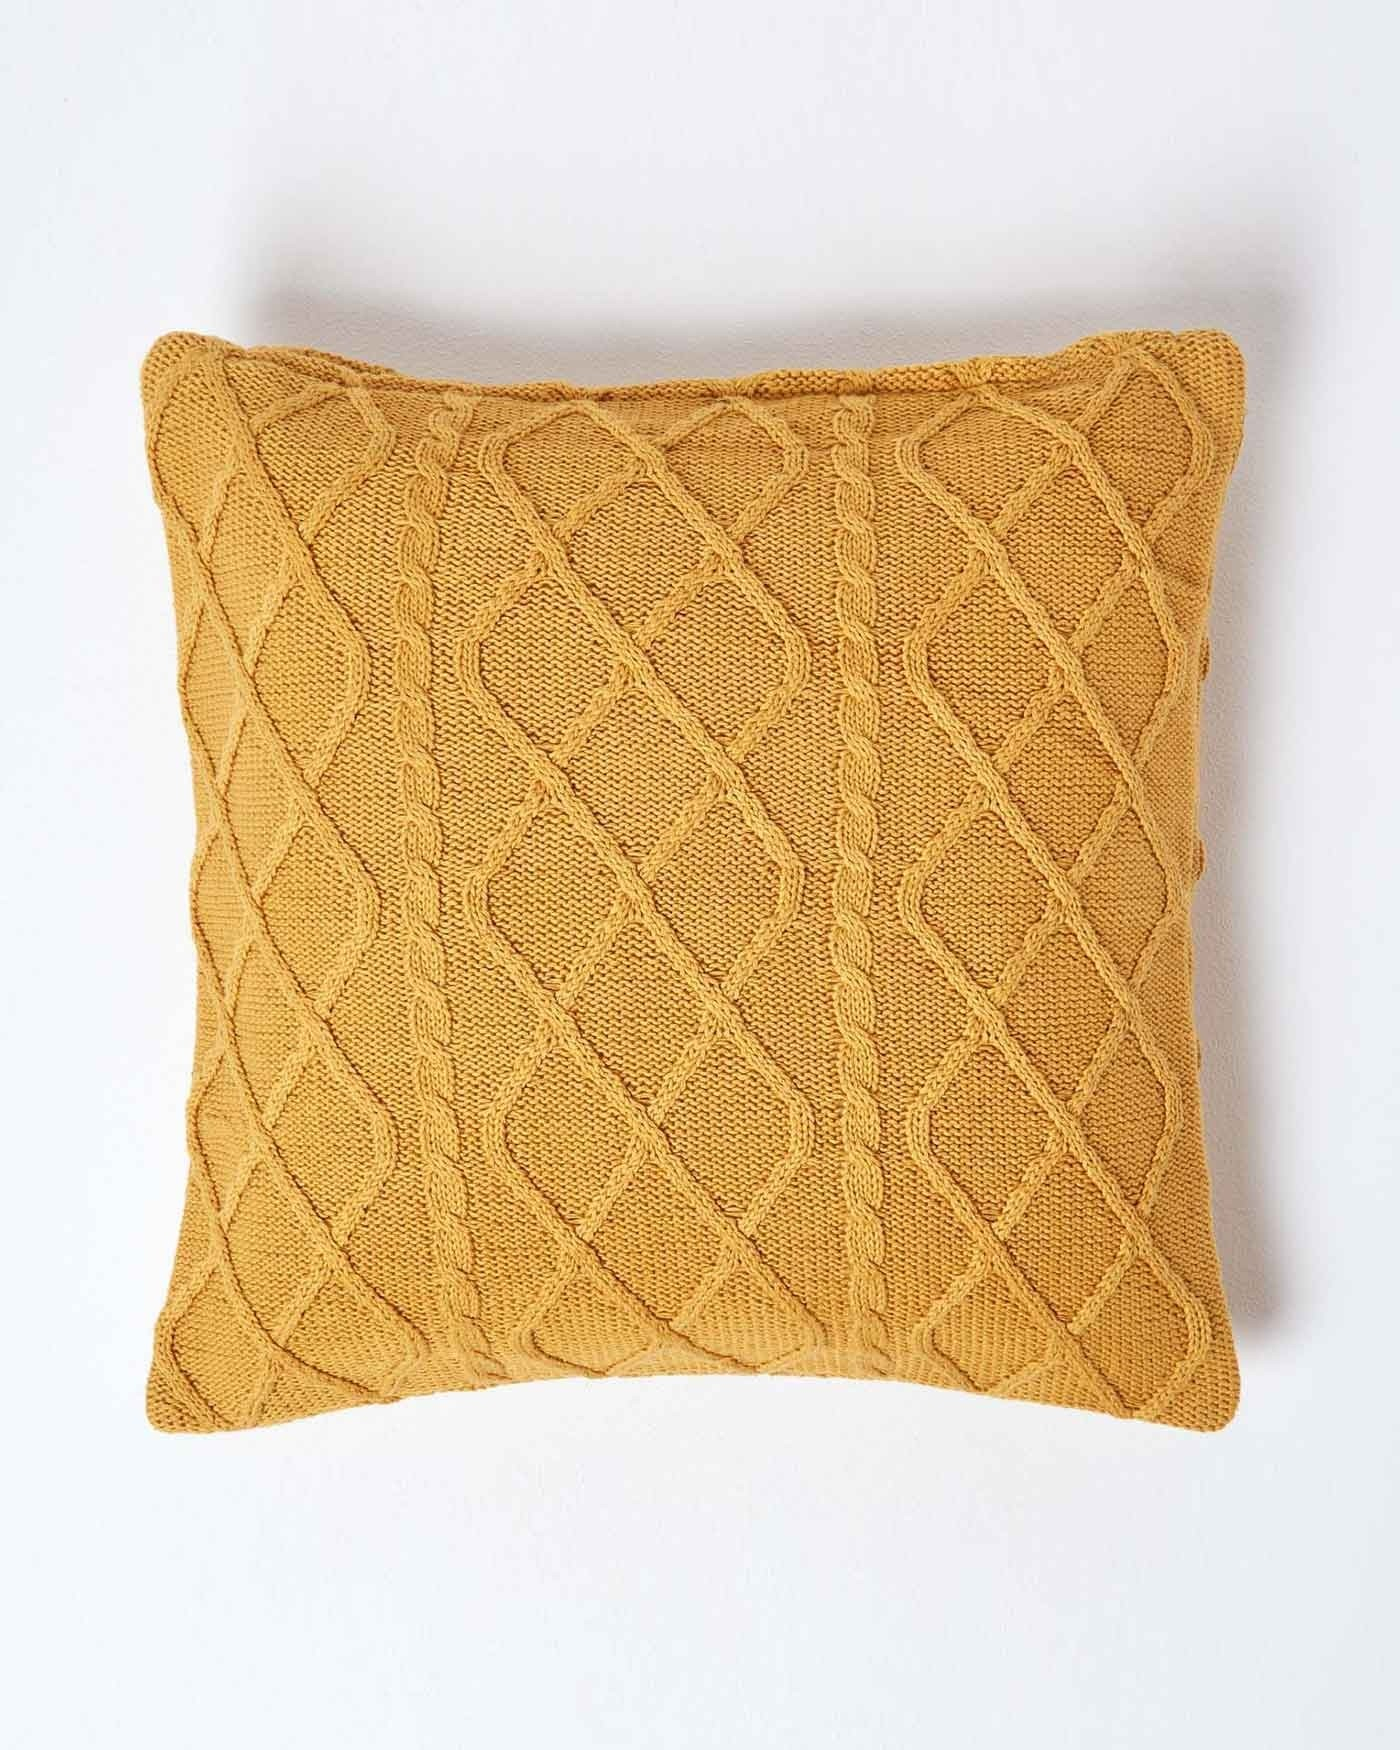 Knitting Pattern For Cushion Cover With Cables Mustard Diamond Cable Knit Cushion Cover 45 X 45 Cm